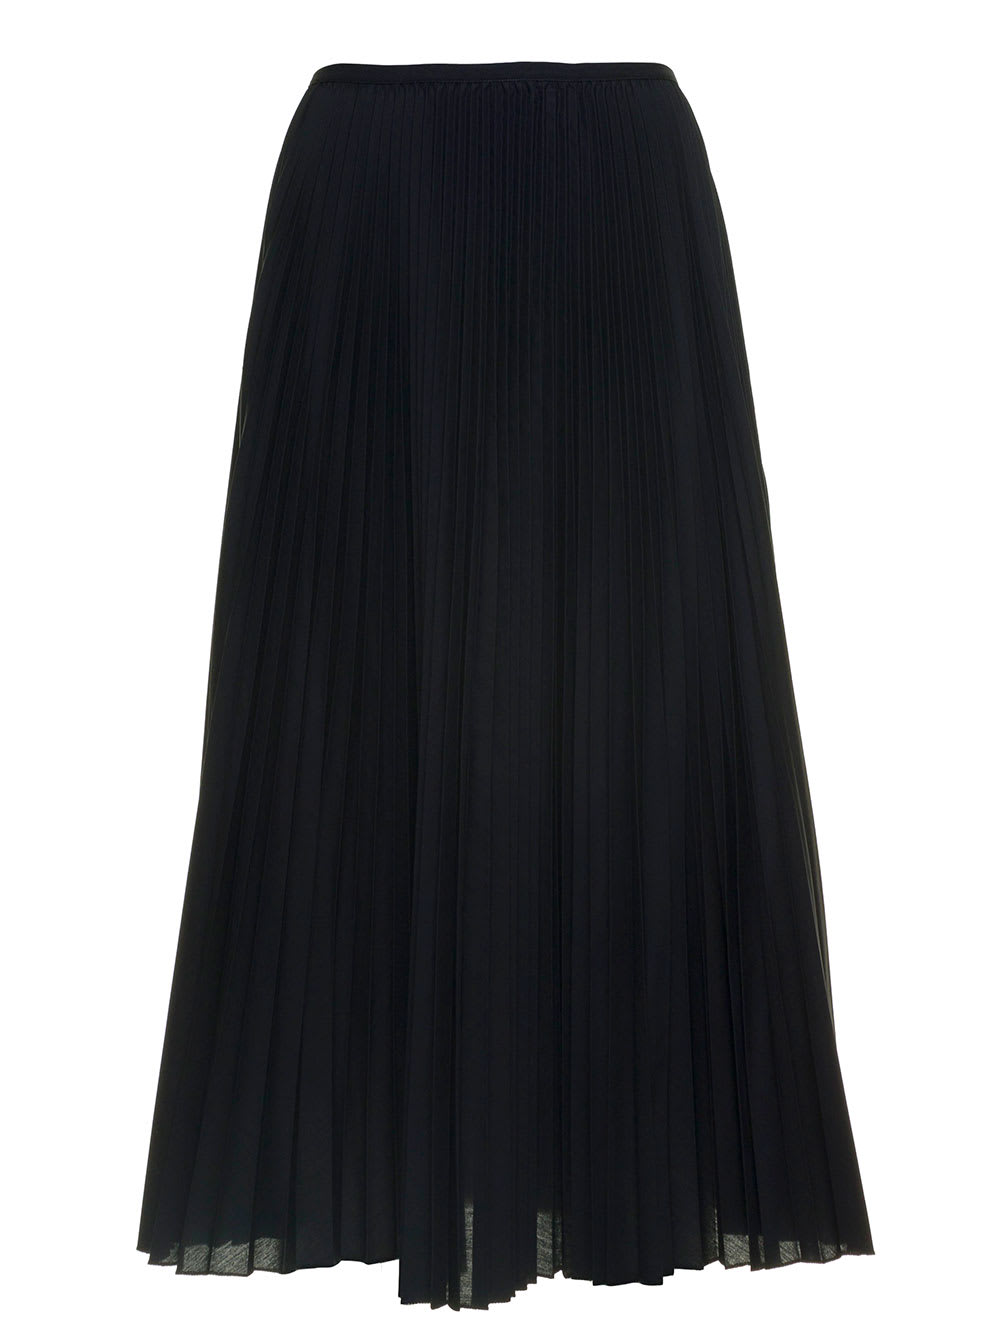 Federica Tosi Long Black Pleated Skirt In Cotton Blend